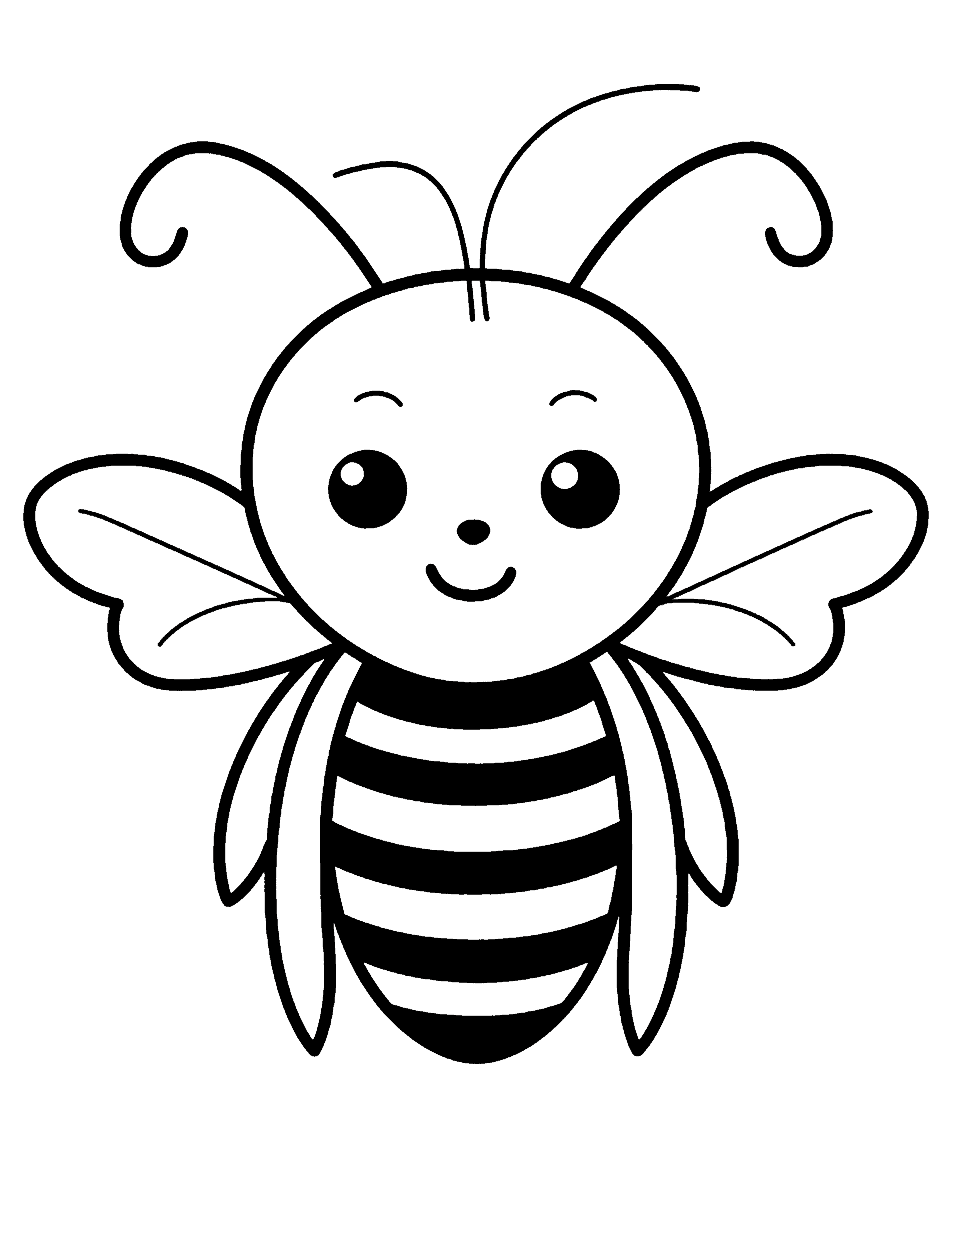 Kawaii Bumblebee Cute Coloring Page - A happy bumblebee with a friendly face and vibrant yellow stripes.